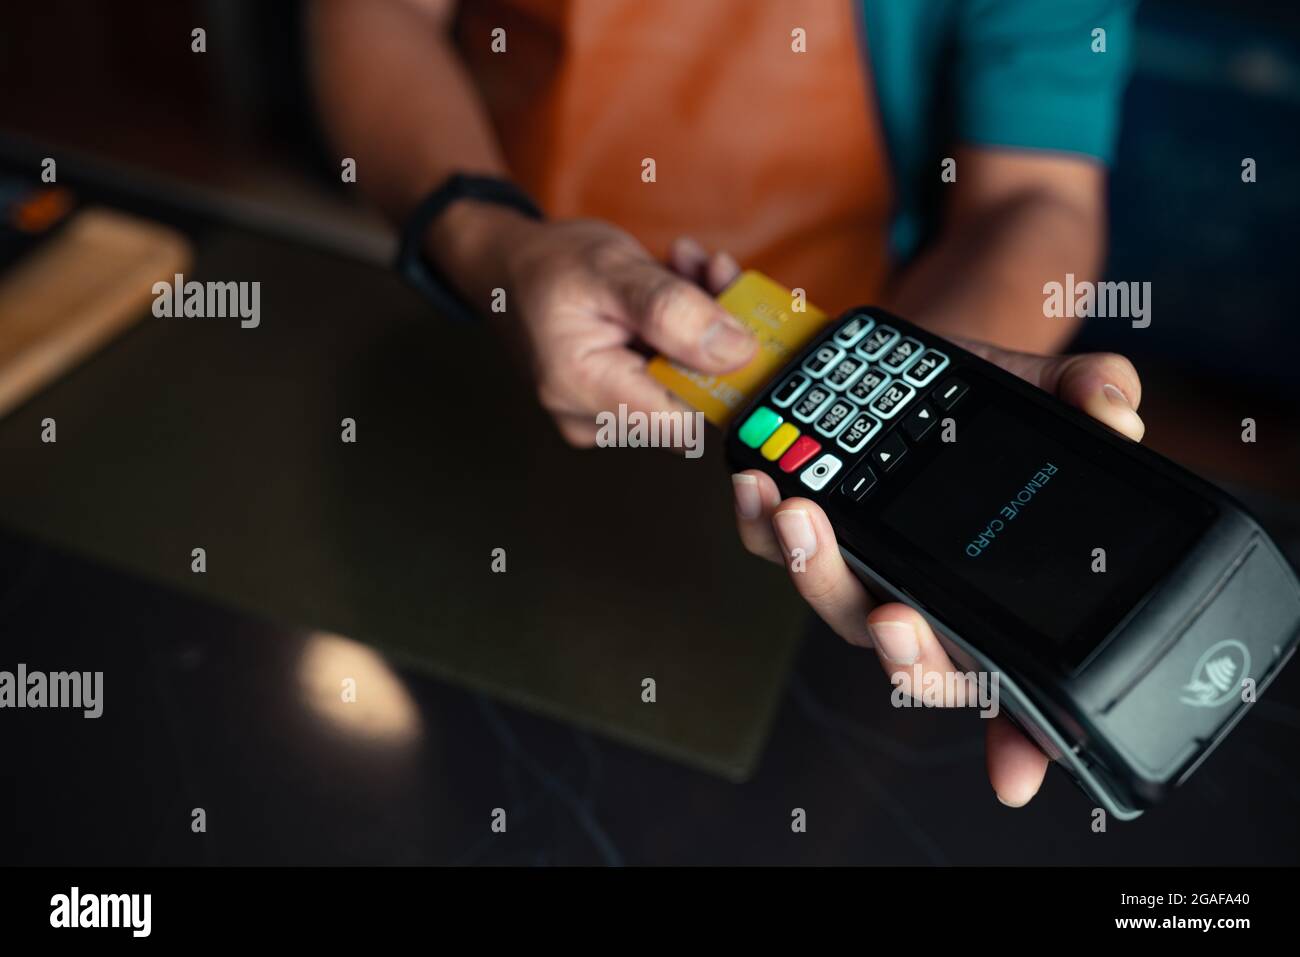 Payment by credit card via credit card swipe machine Stock Photo